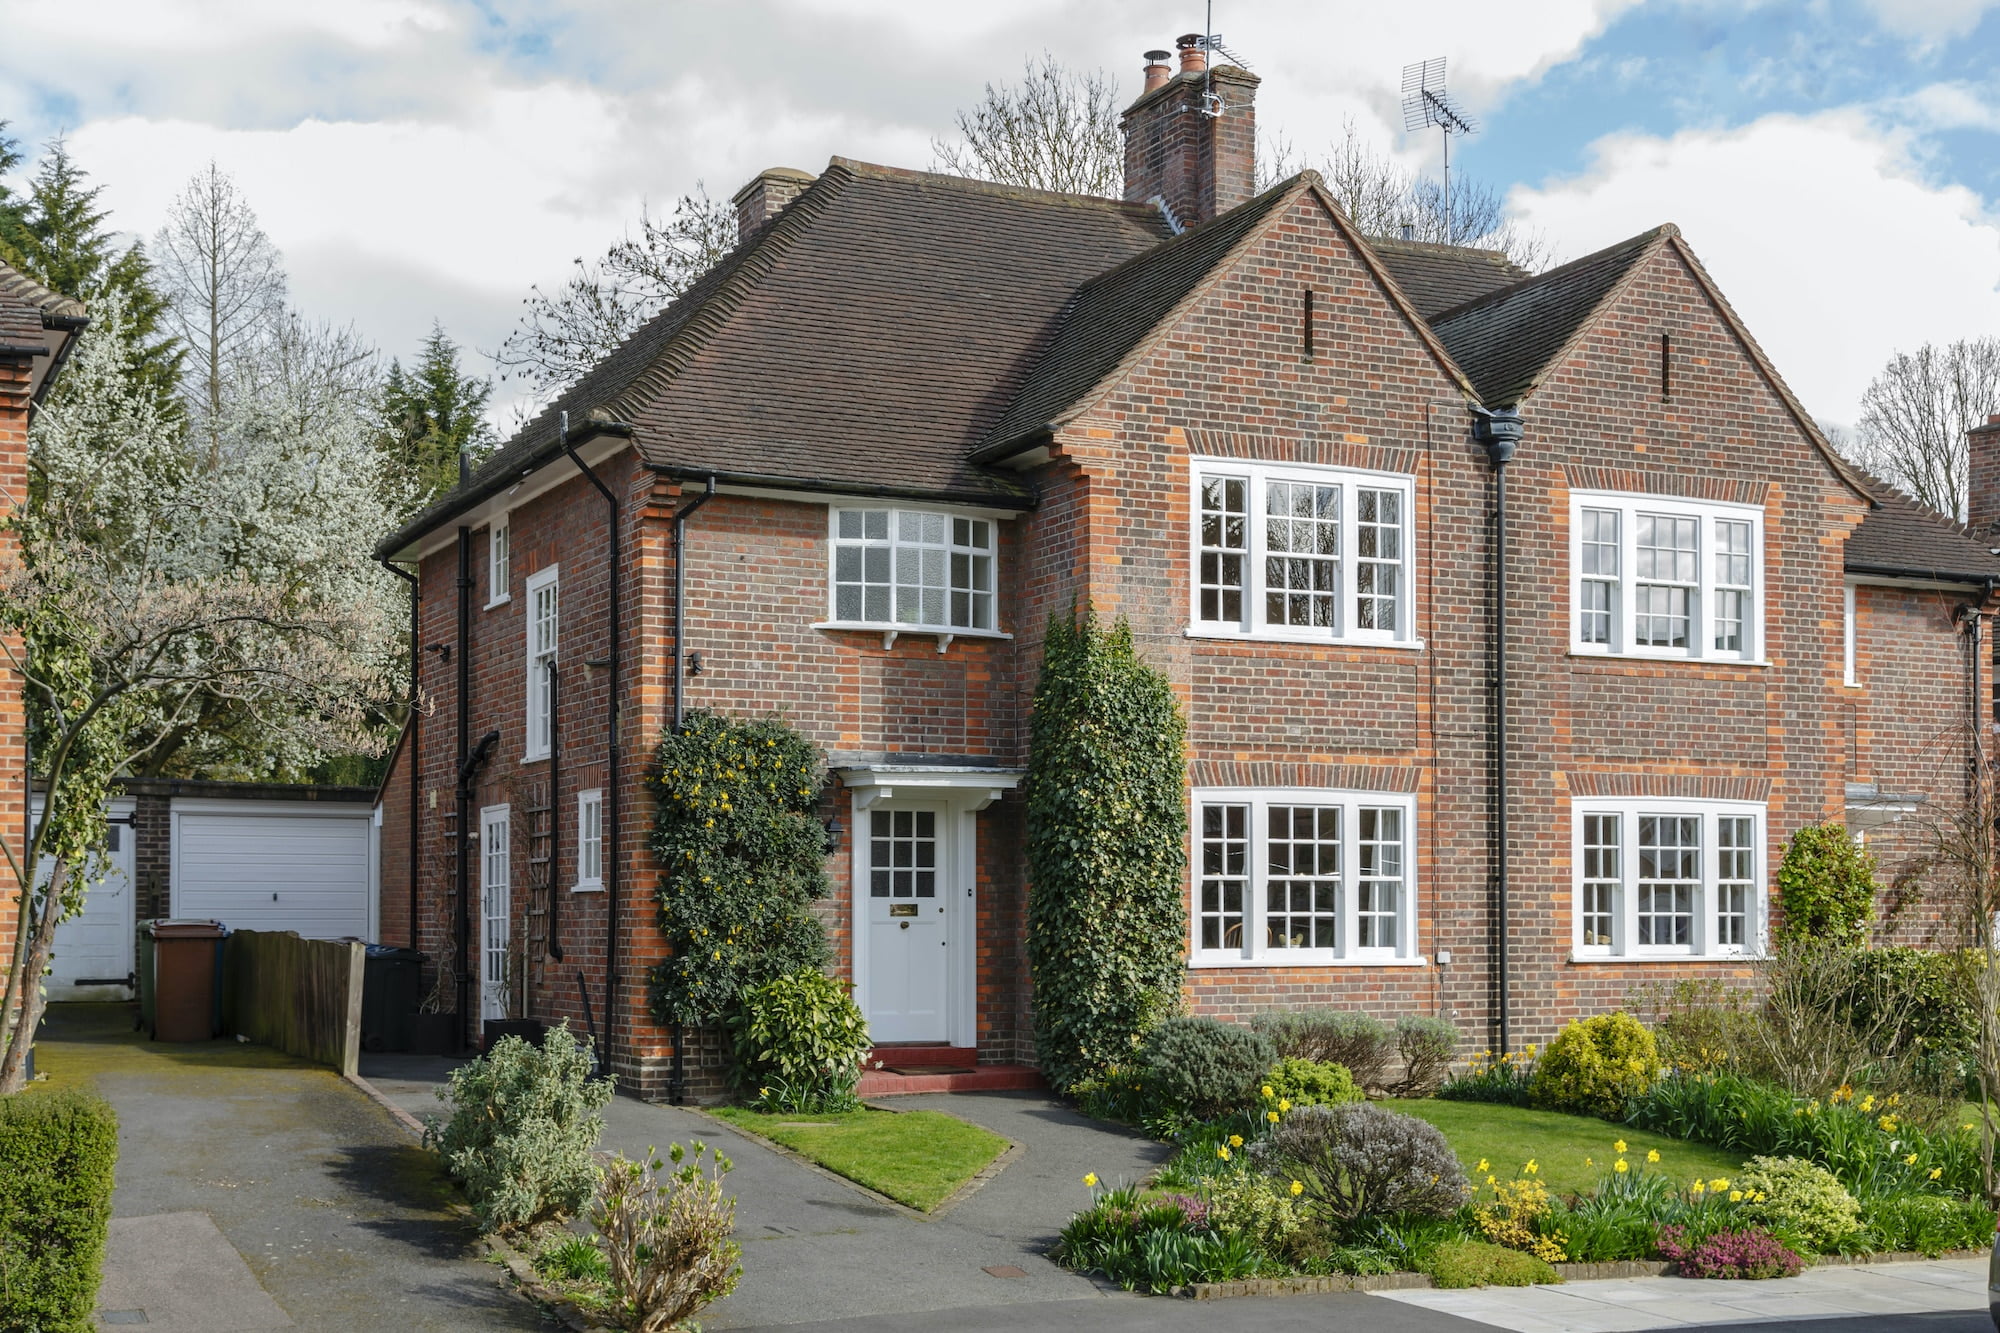 Security Systems Installation in Security Systems Installation in Hampstead Garden Suburb